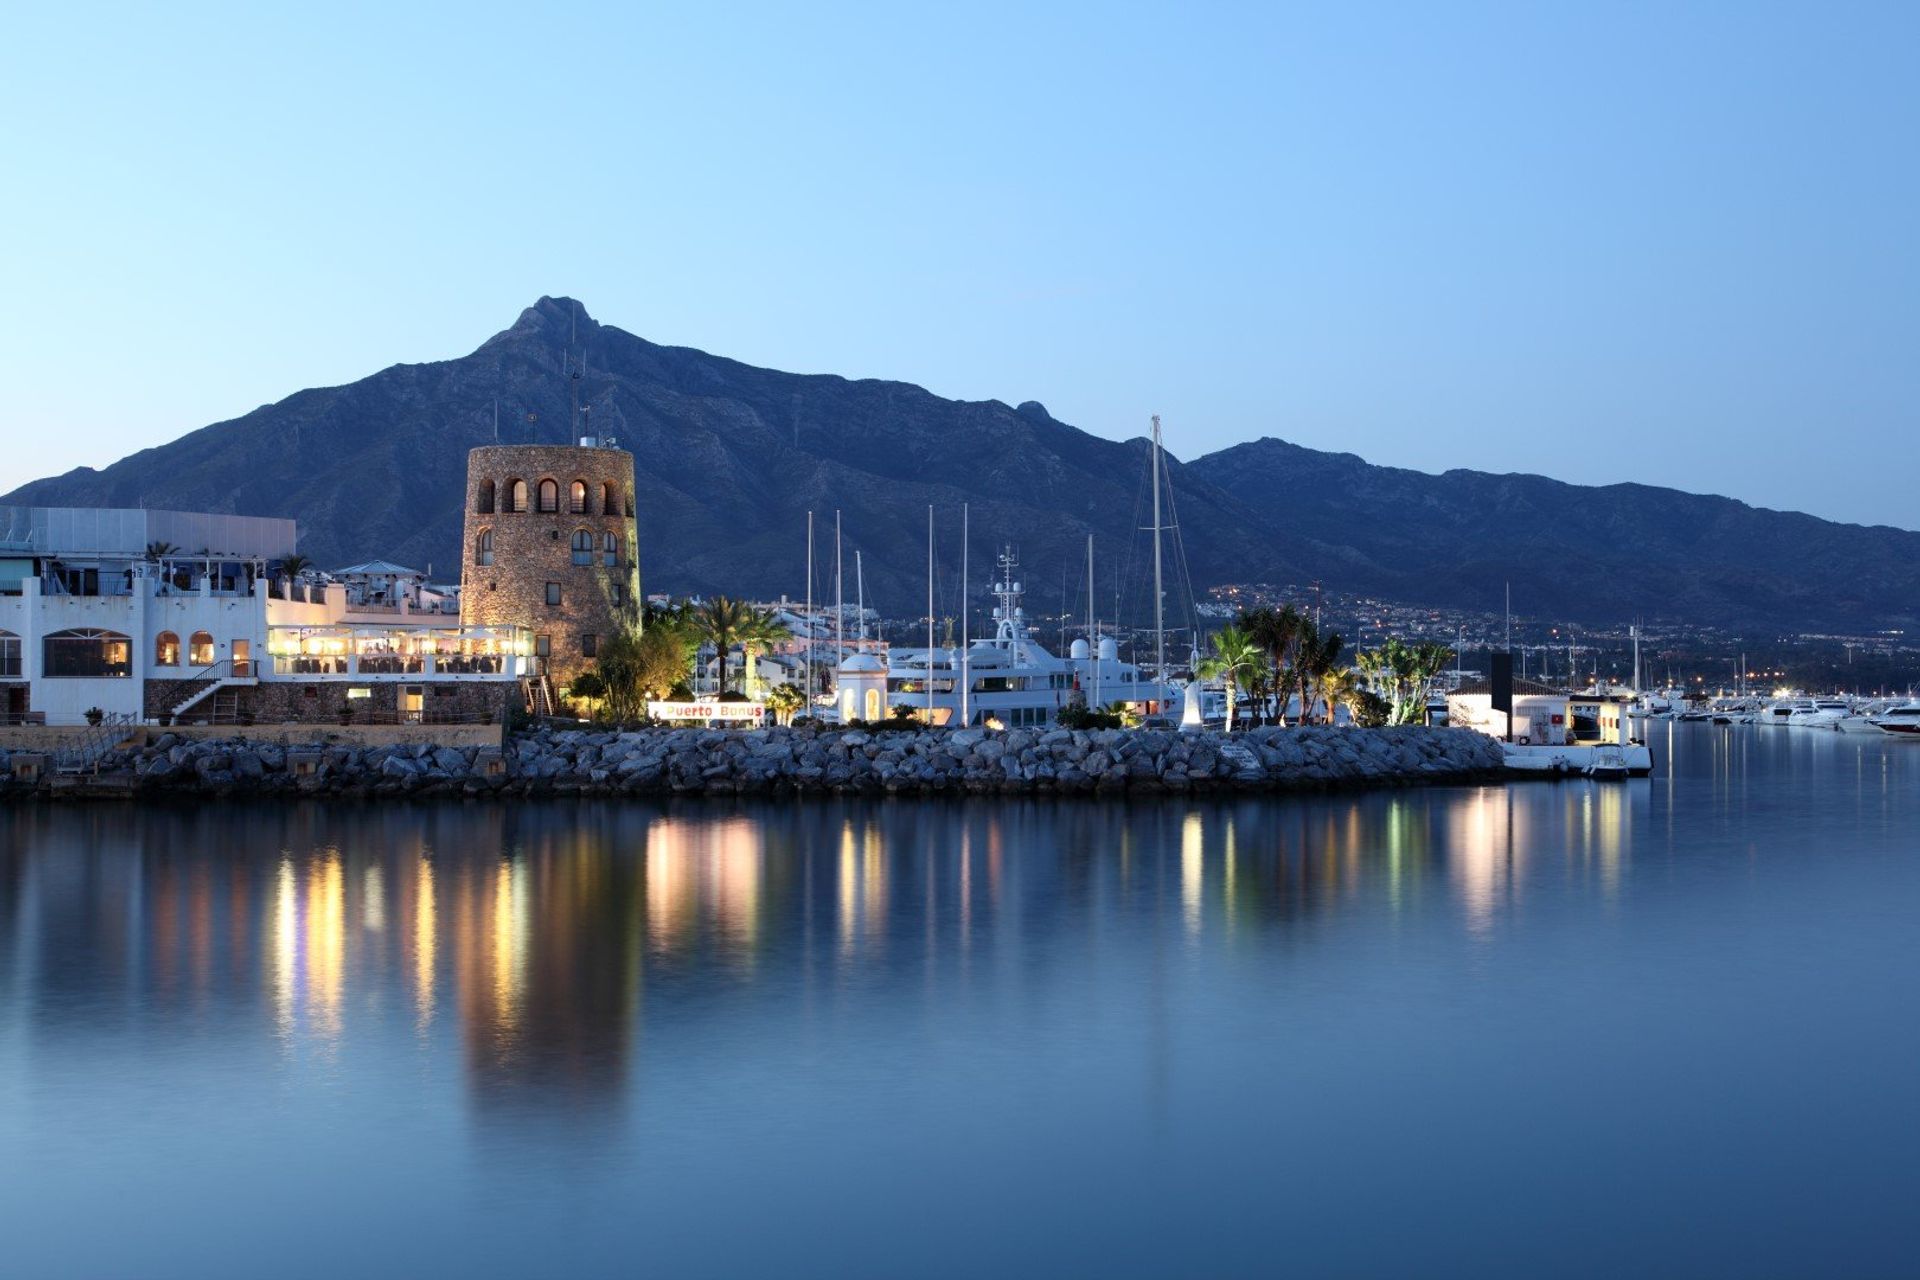 Enjoy a nice alfresco dinner at one of the many waterfront restaurants with scenic views of Puerto Banus' watchtower